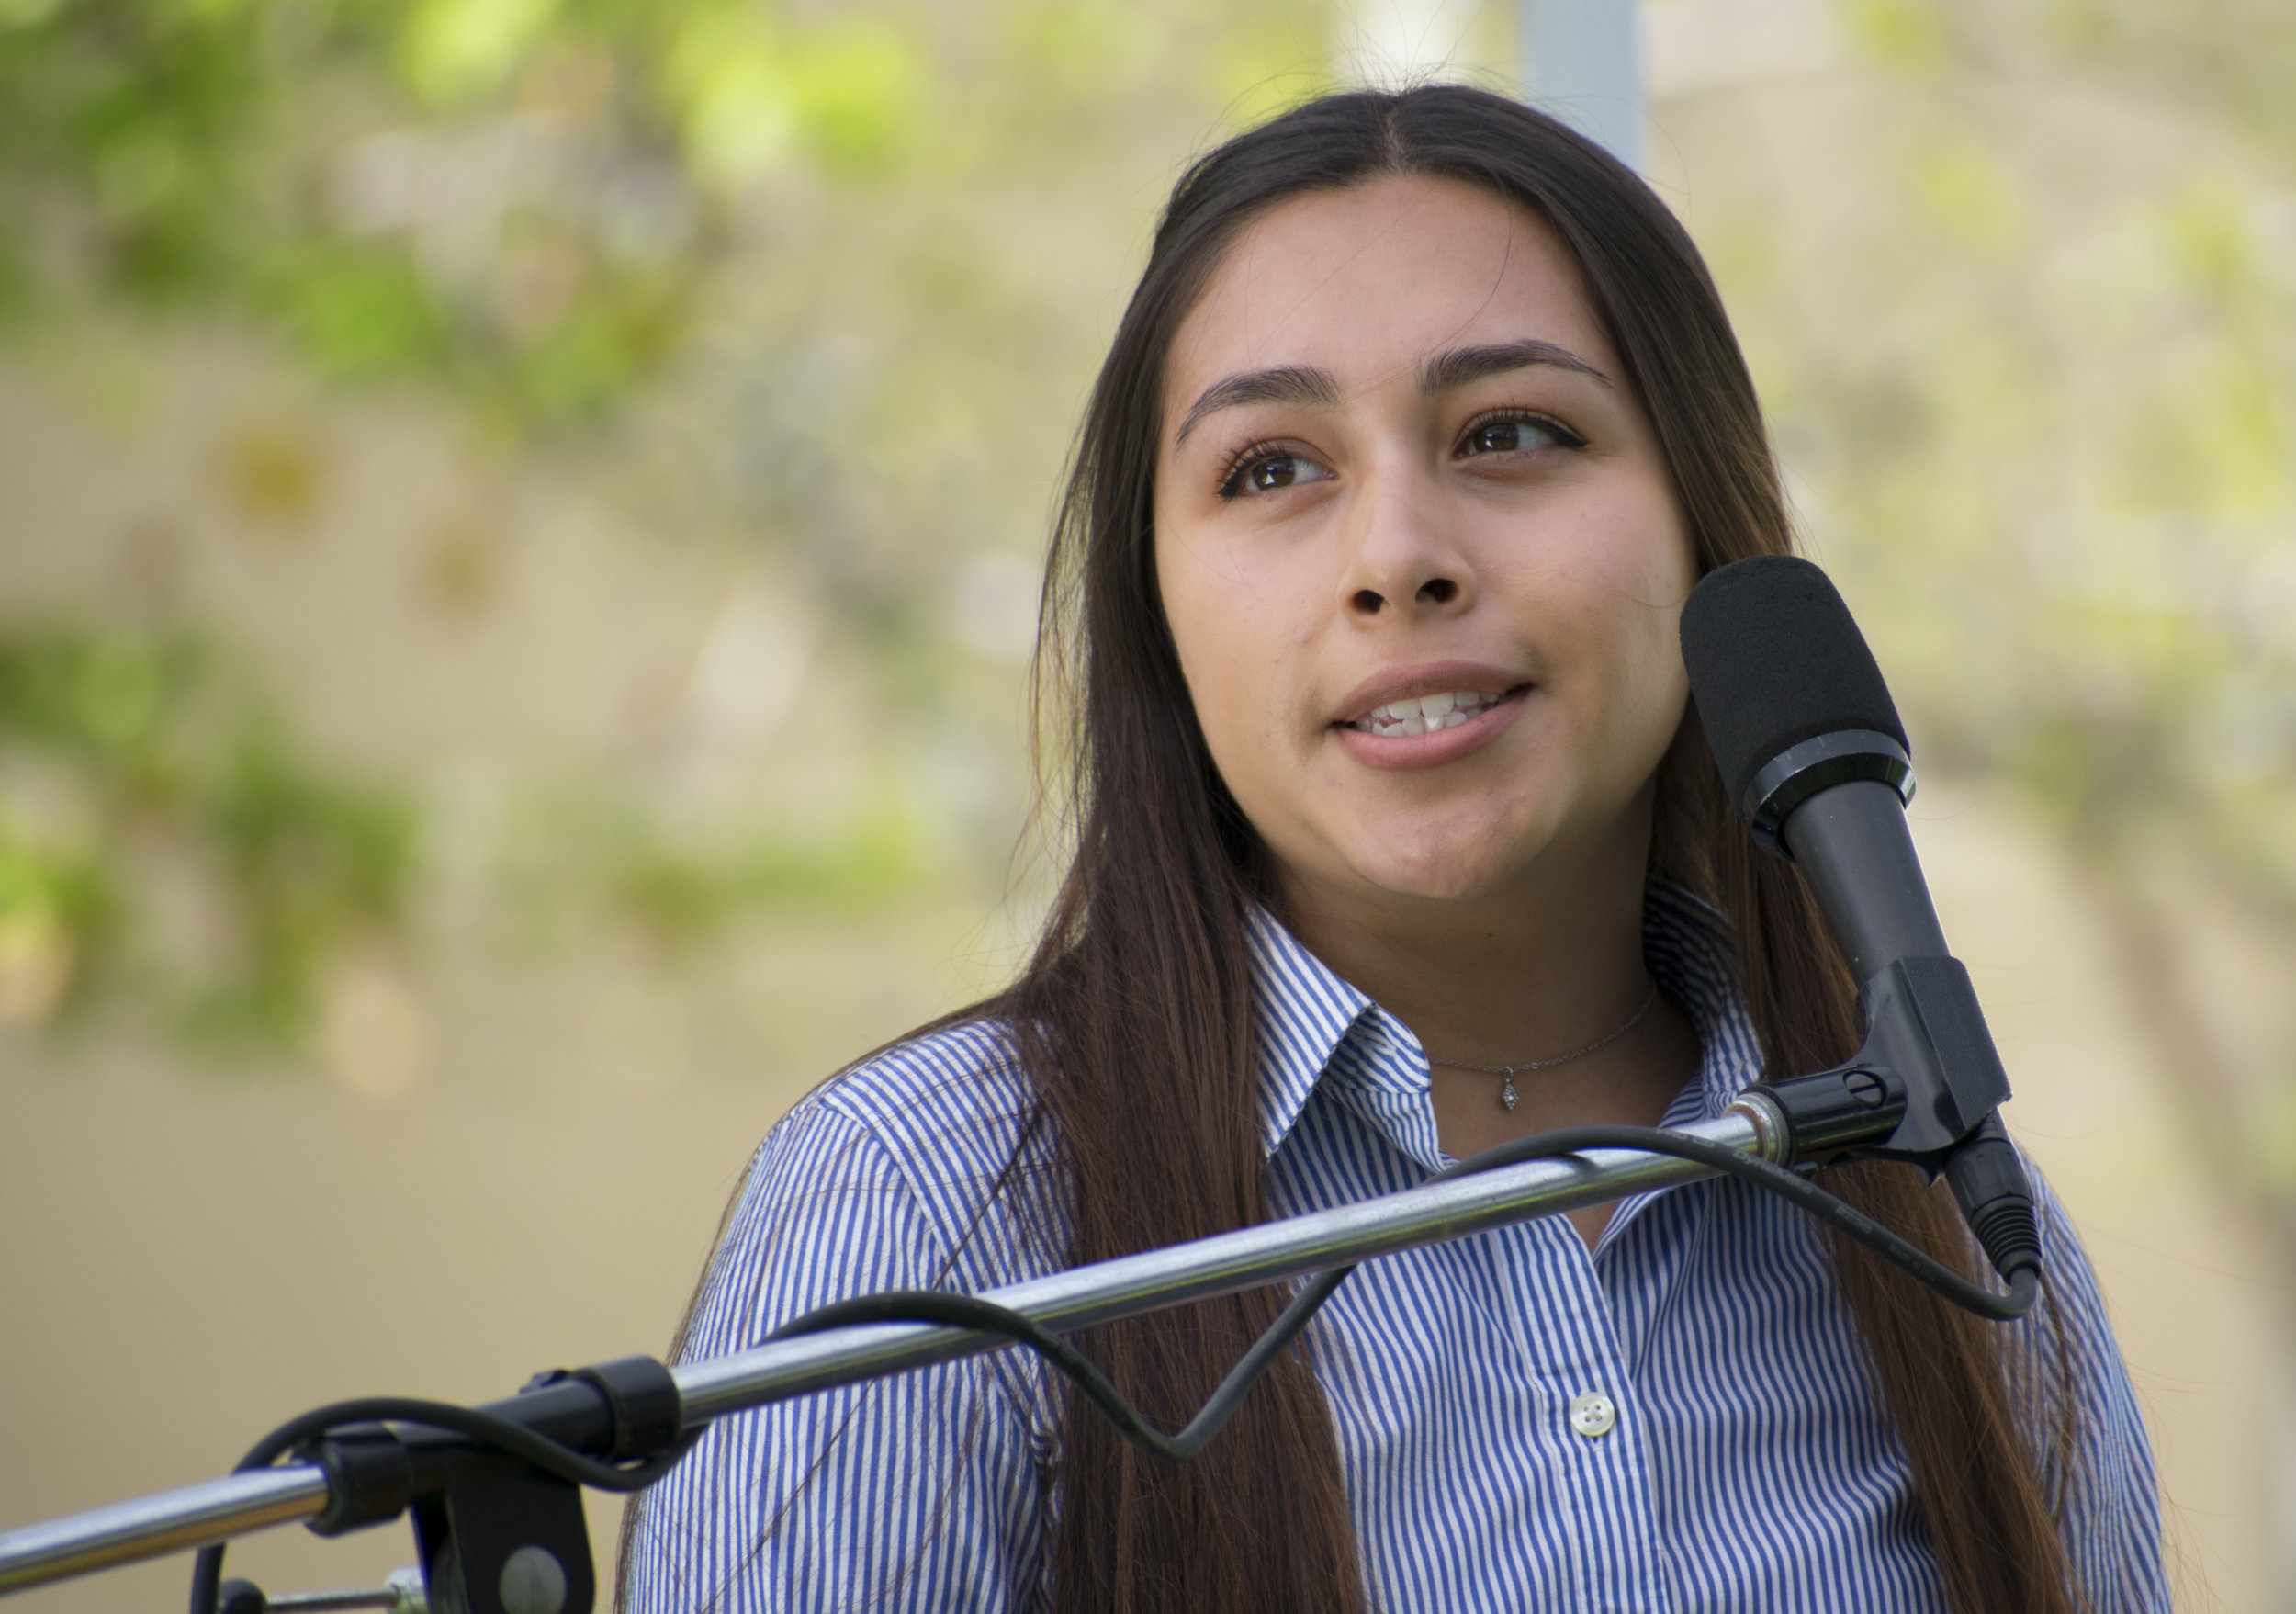  Suhey Avila, a candidate for Director of Activities Associated Students of Santa Monica College introduces herself during a forum to give candidates running for the election a platform on April 3 in Santa Monica, California. Hernandez is running wit